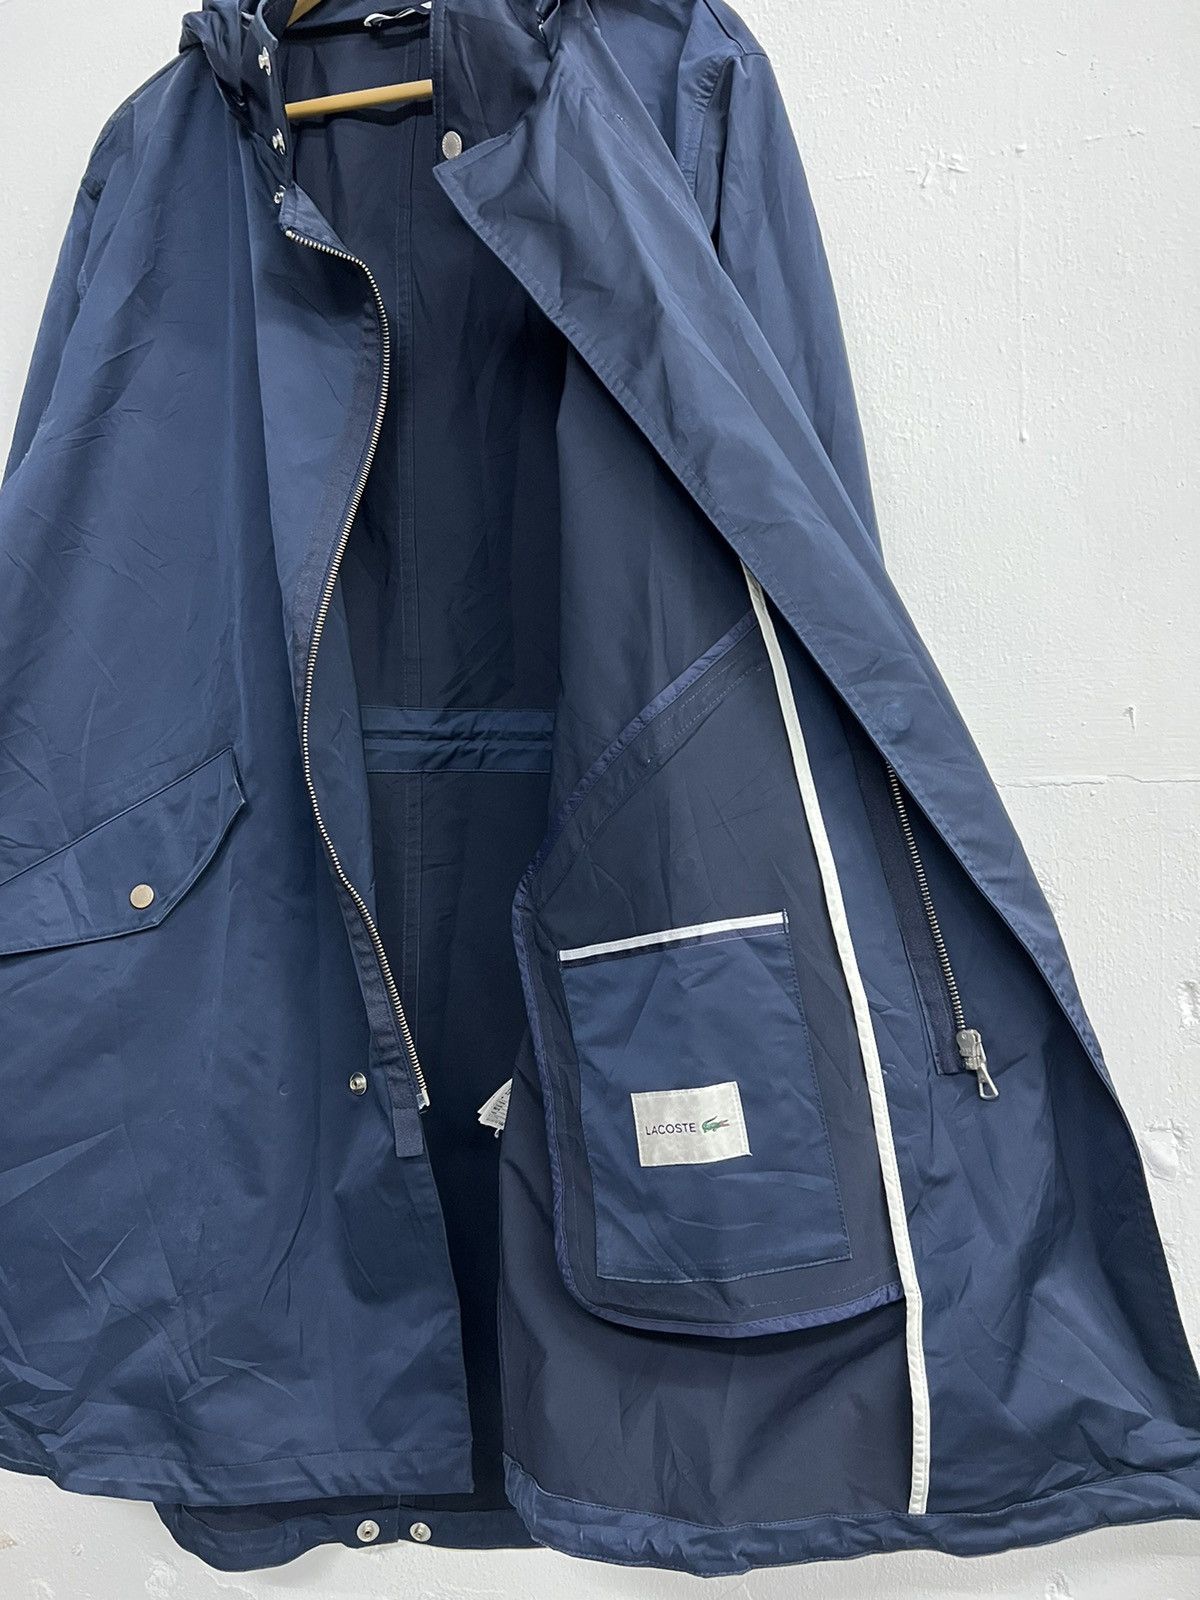 Lacoste Trench Coat - 9